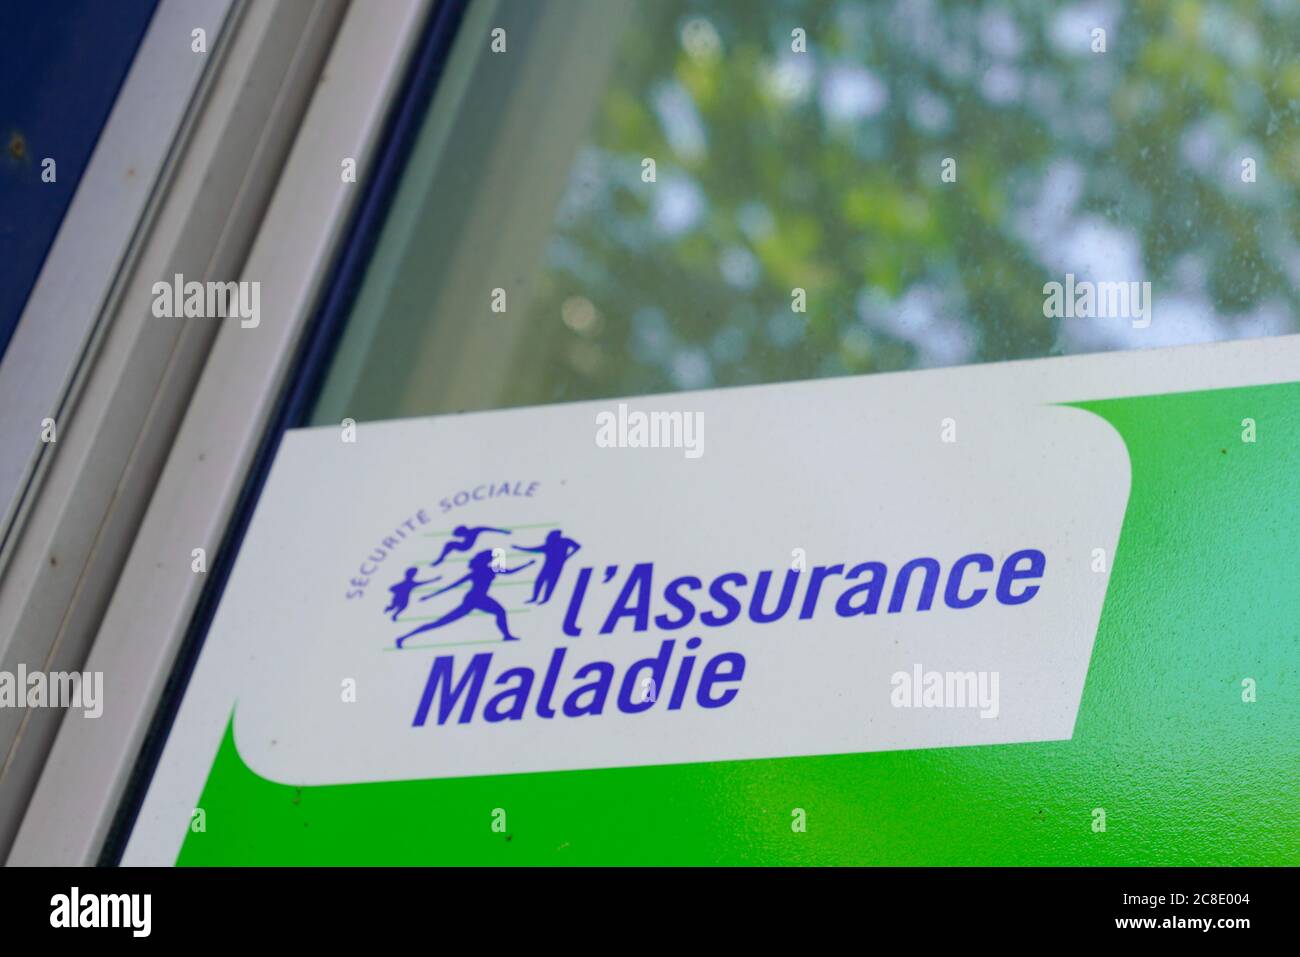 Bordeaux , Aquitaine / France - 07 21 2020 : l'assurance maladie logo and text sign of French social security Stock Photo